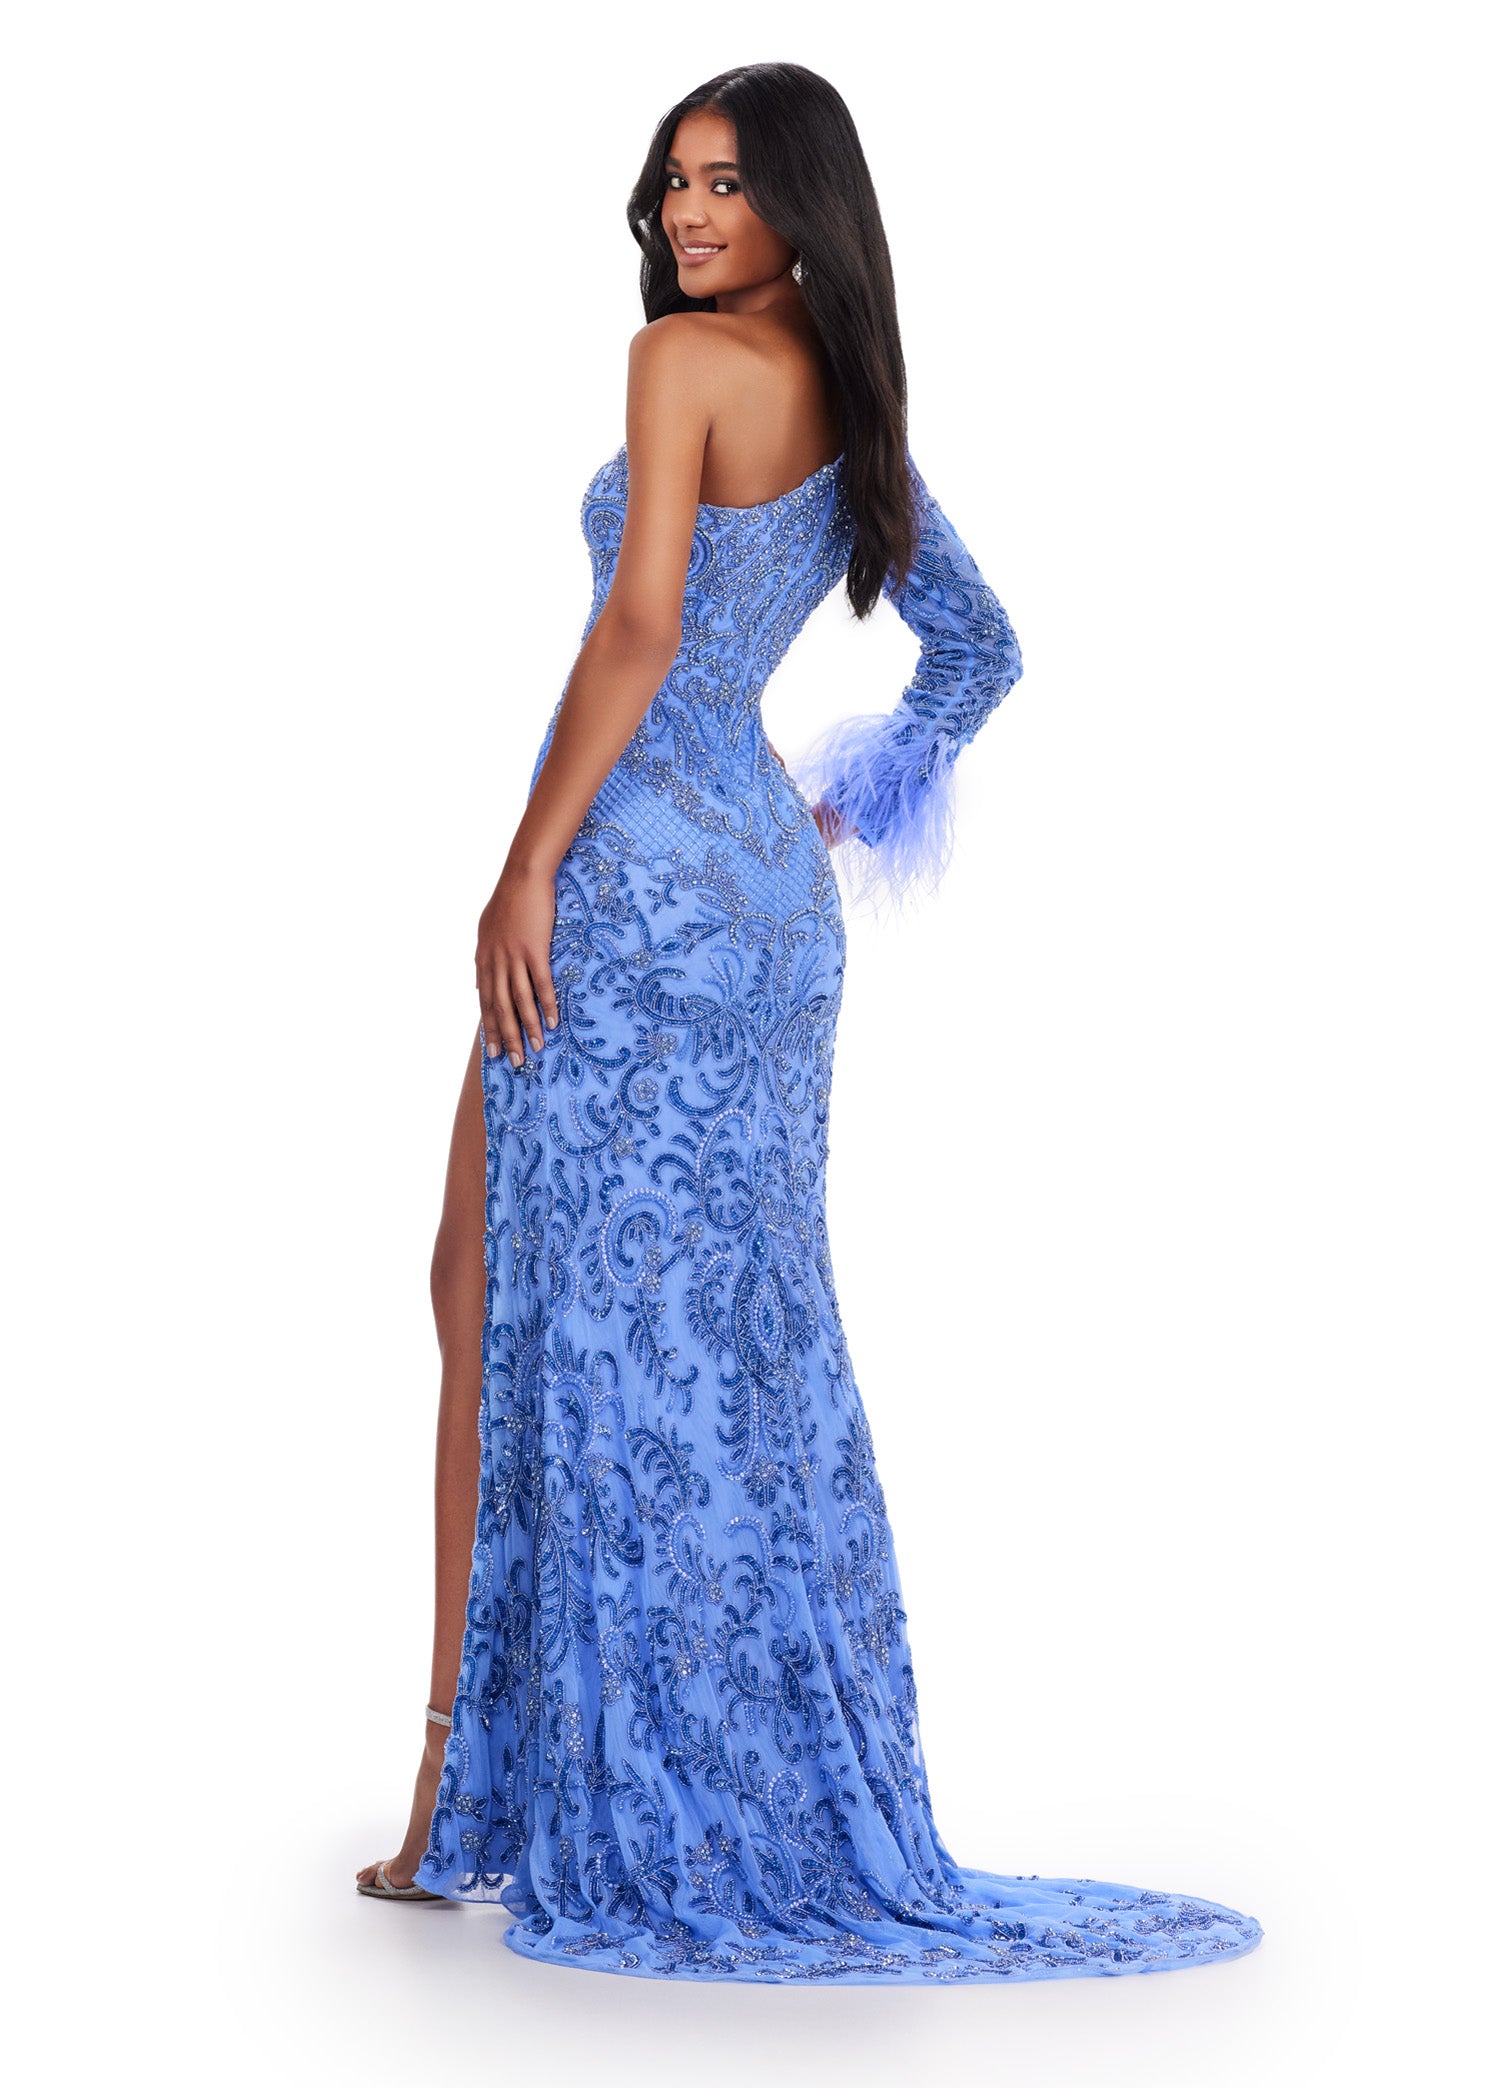 The Ashley Lauren 11649 Long Prom Dress is an elegant and unique choice for any formal occasion. The one shoulder design is complemented by a striking one sleeve cut out and intricate beaded detailing. The feather cuff adds a touch of glamour to this stunning pageant gown. Make an entrance in this fully beaded gown. This intricately beaded one shoulder gown is accented by side cut out and feather cuff sleeve. The look is complete with a sweep train and left leg slit.